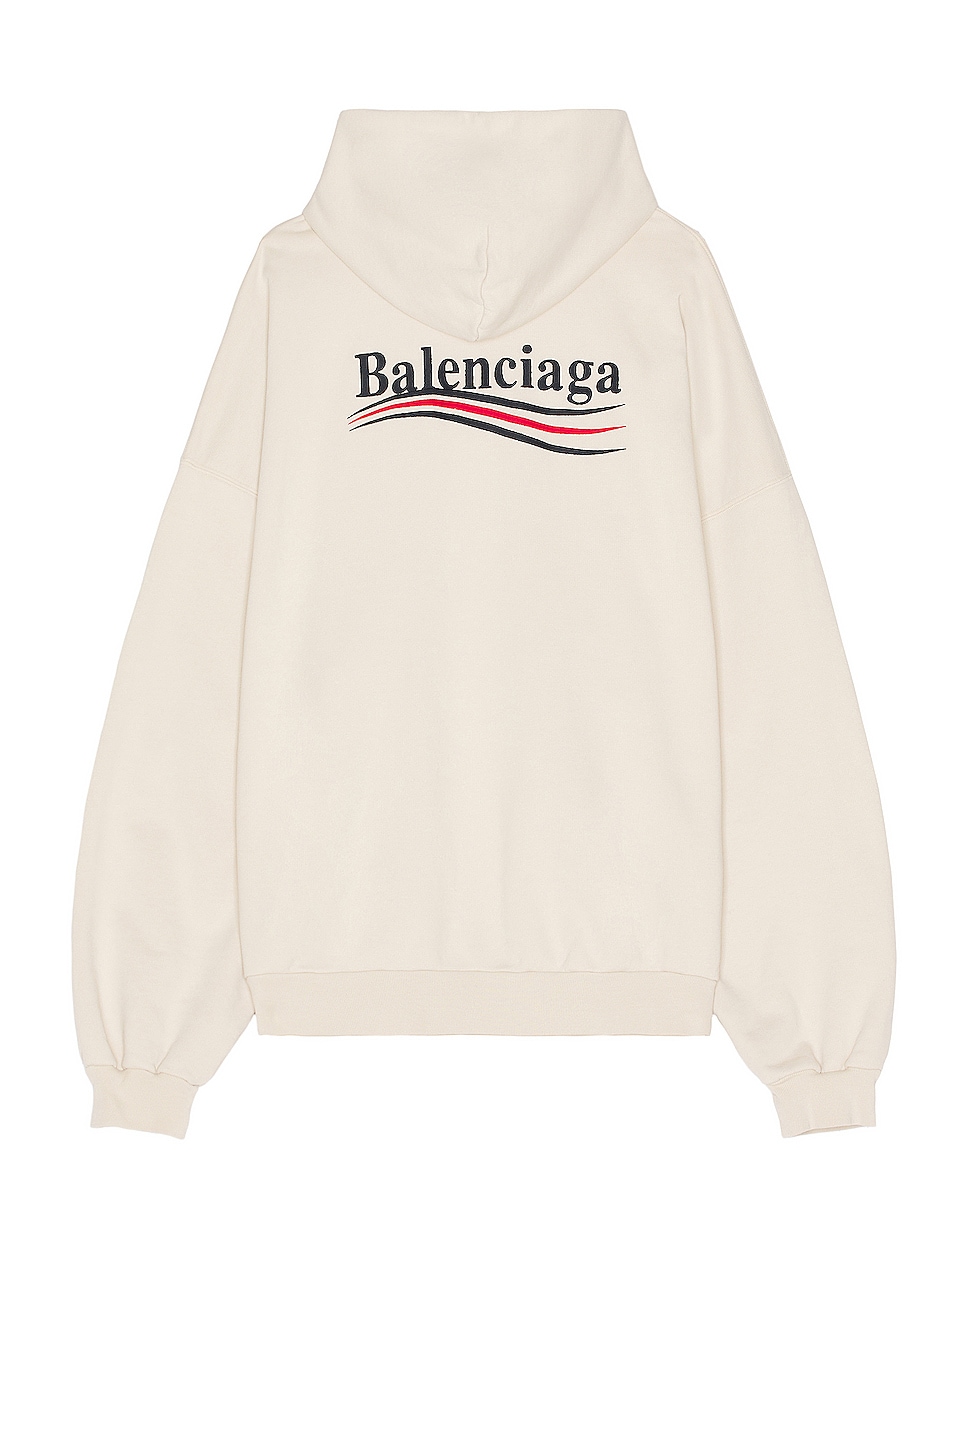 Image 1 of Balenciaga Large Fit Hoodie in Light Beige & White